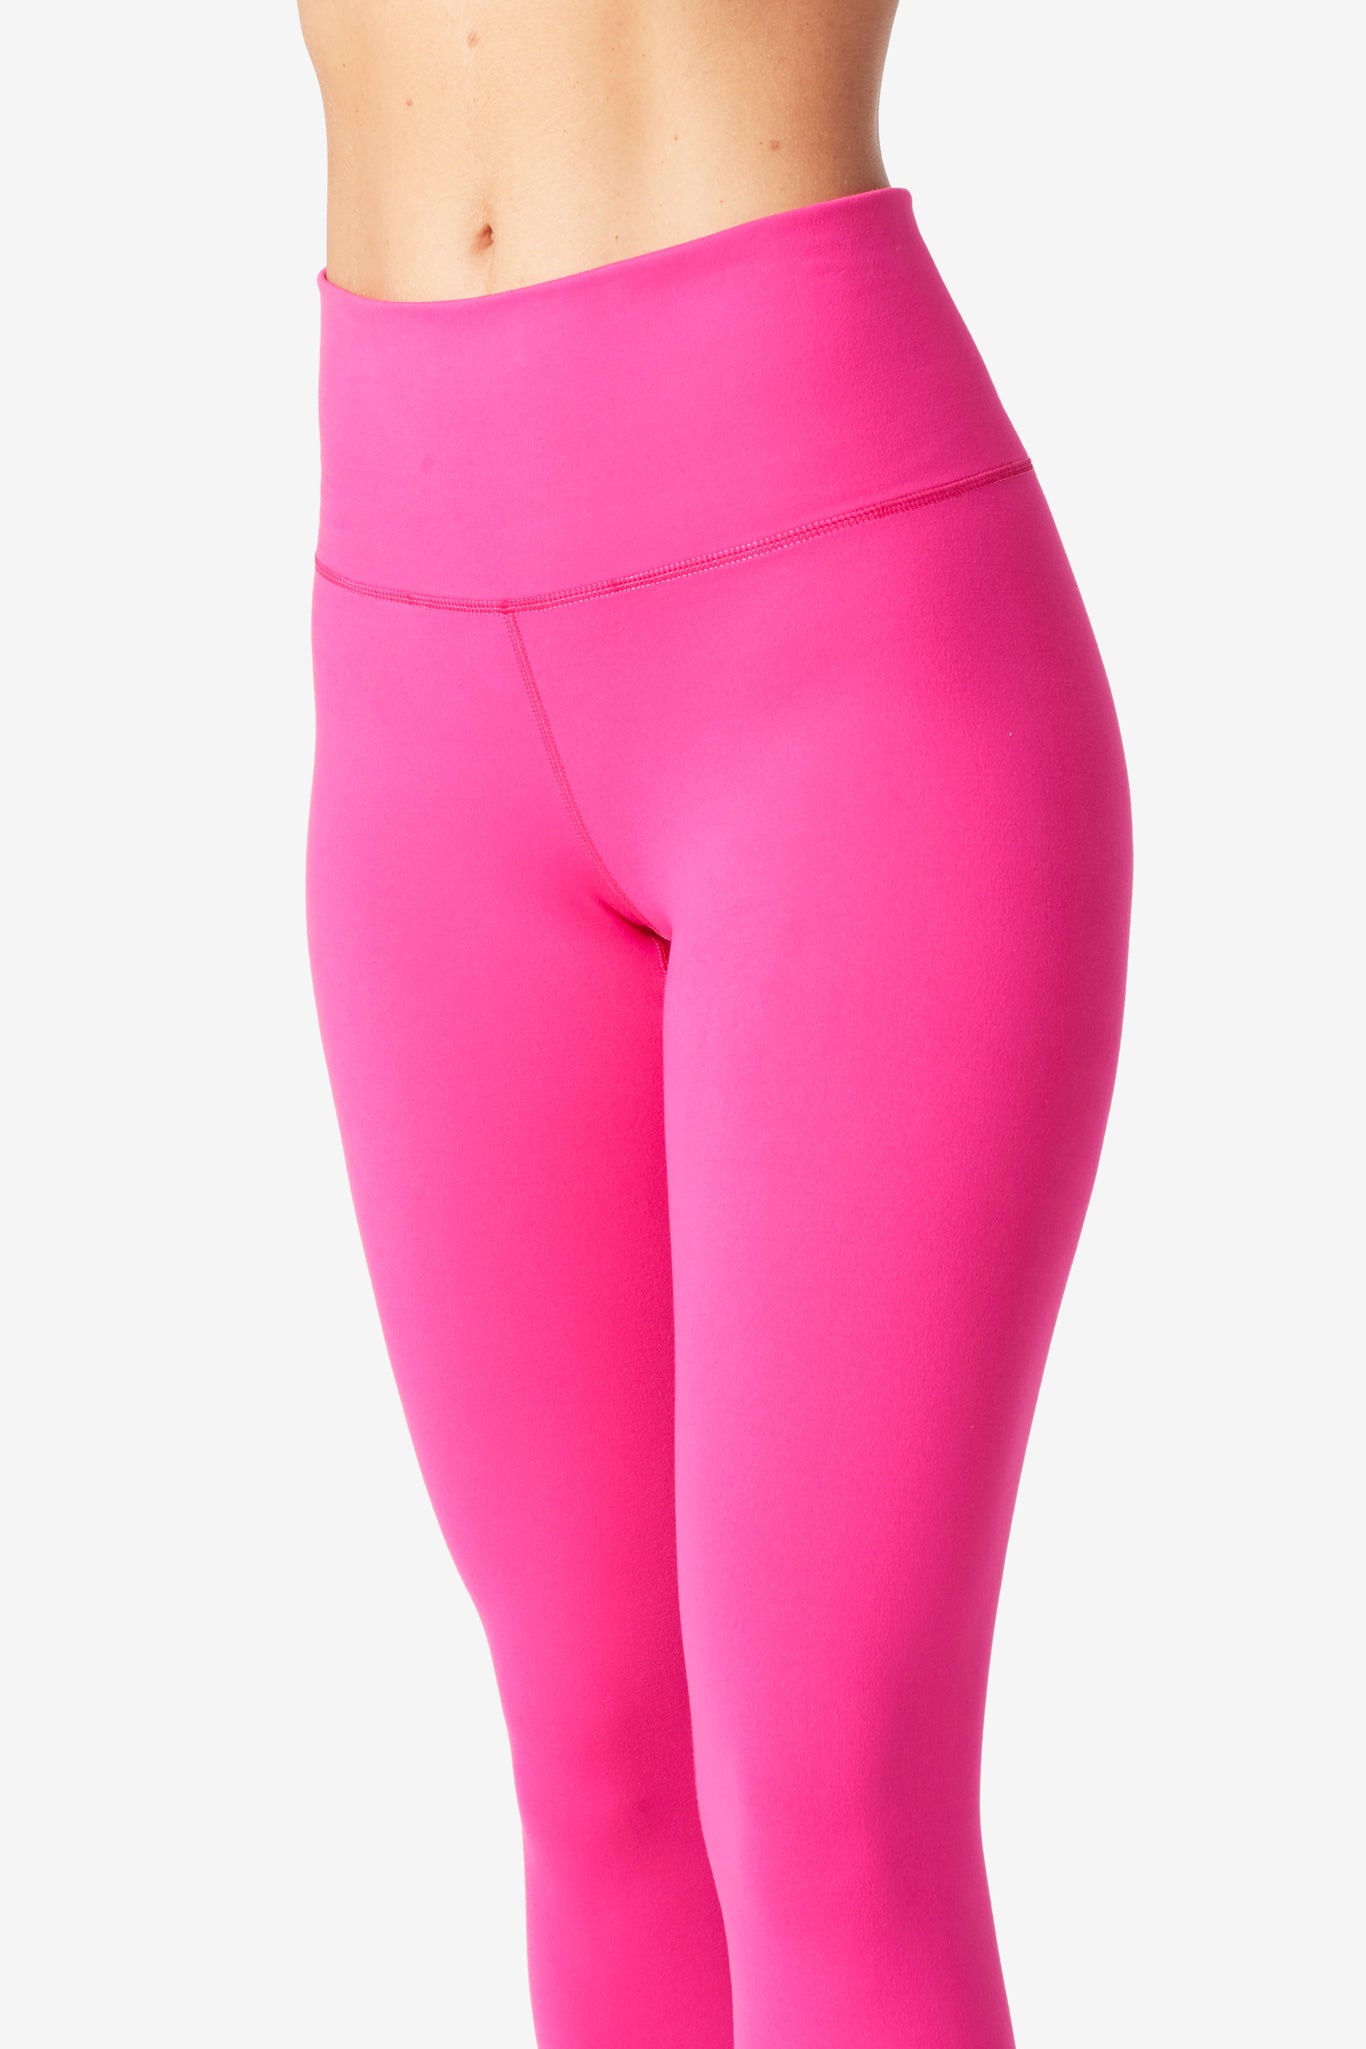 Ombre Ultra Pink High Waisted Legging - Niyama Sol - simplyWORKOUT –  SIMPLYWORKOUT